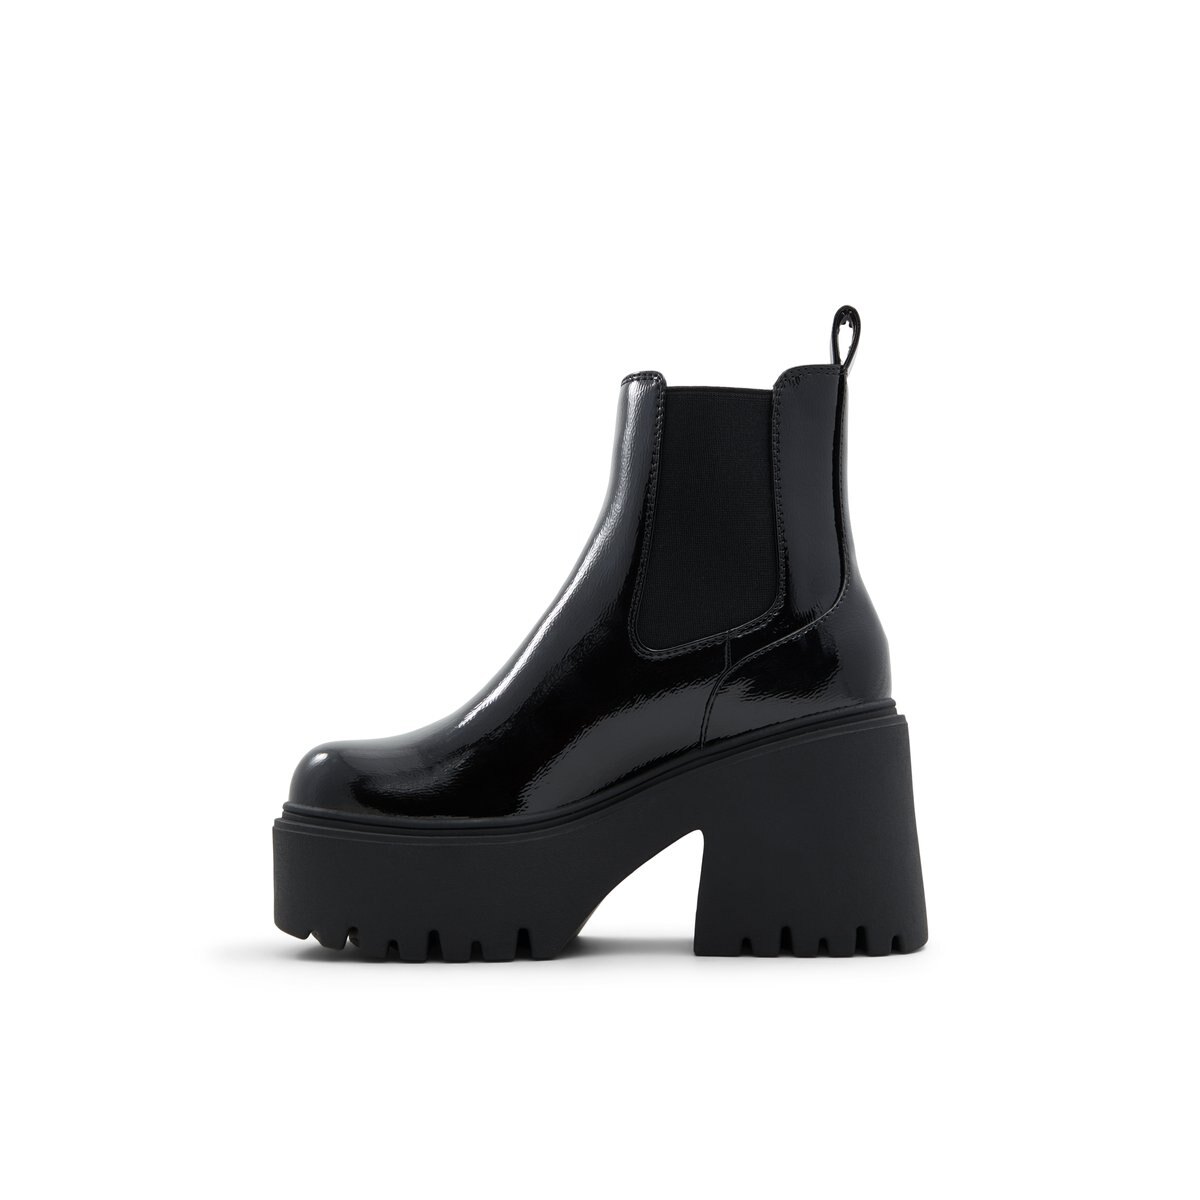 Aila Black Women's Ankle Boots | Call It Spring Canada